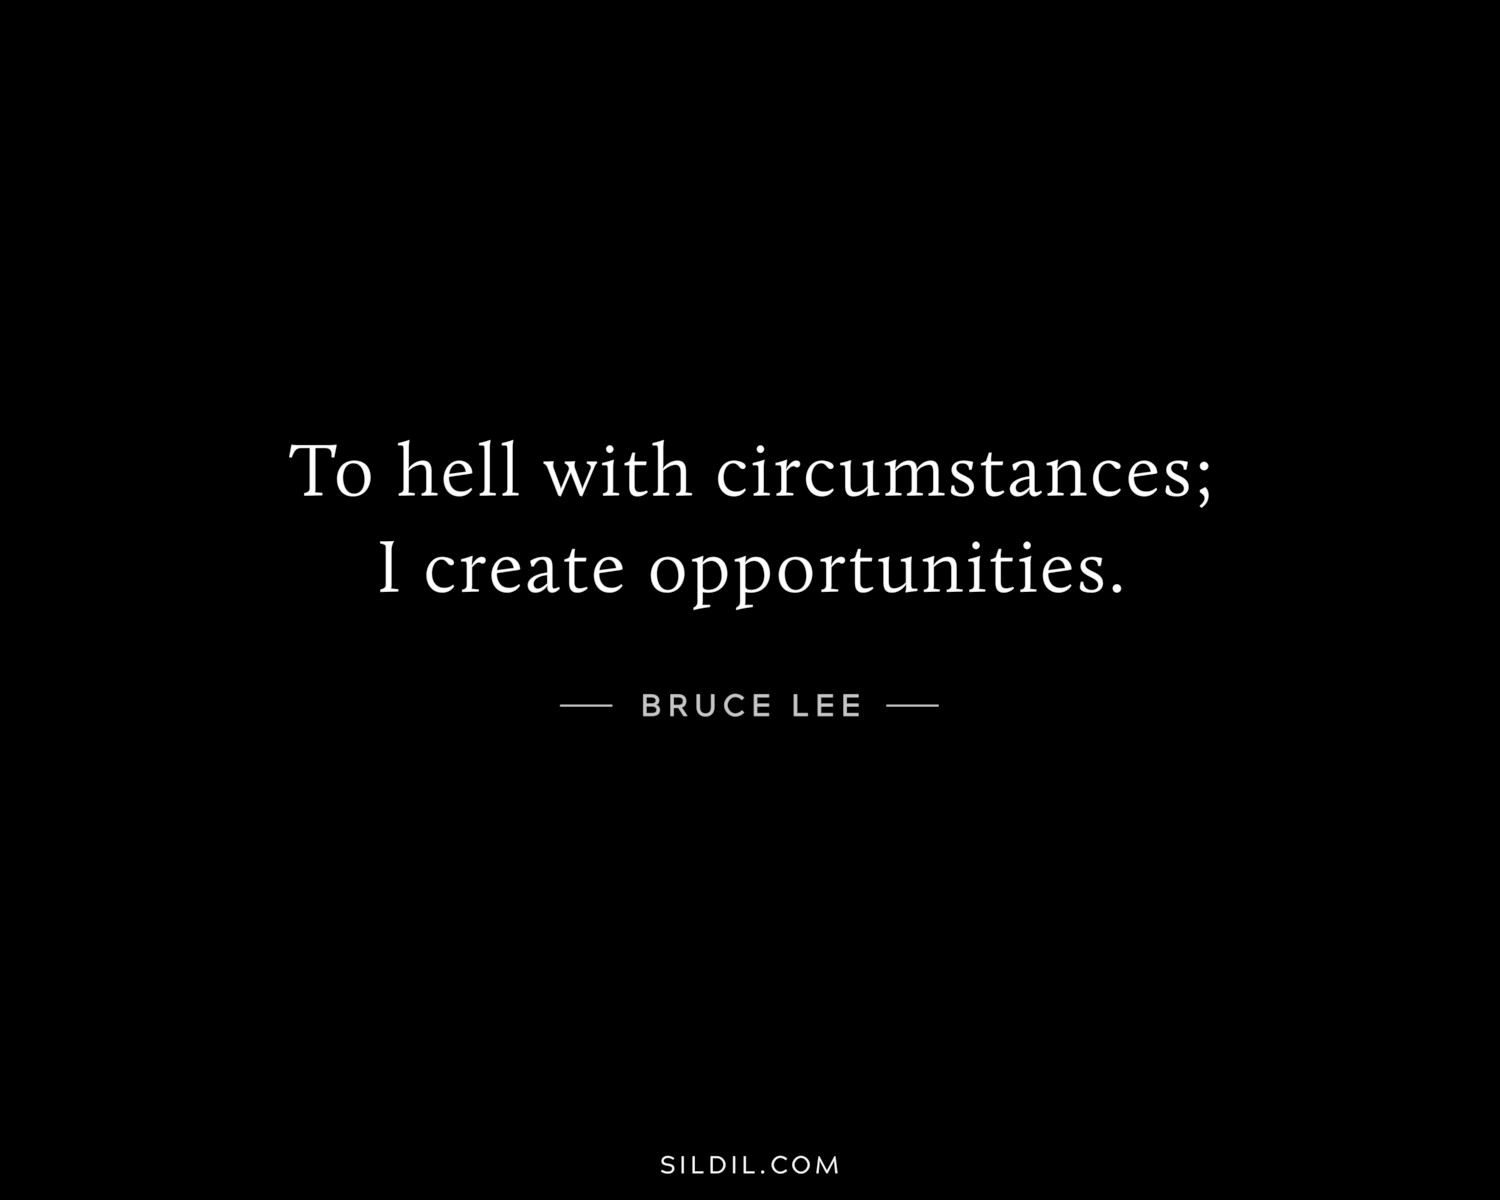 To hell with circumstances; I create opportunities.